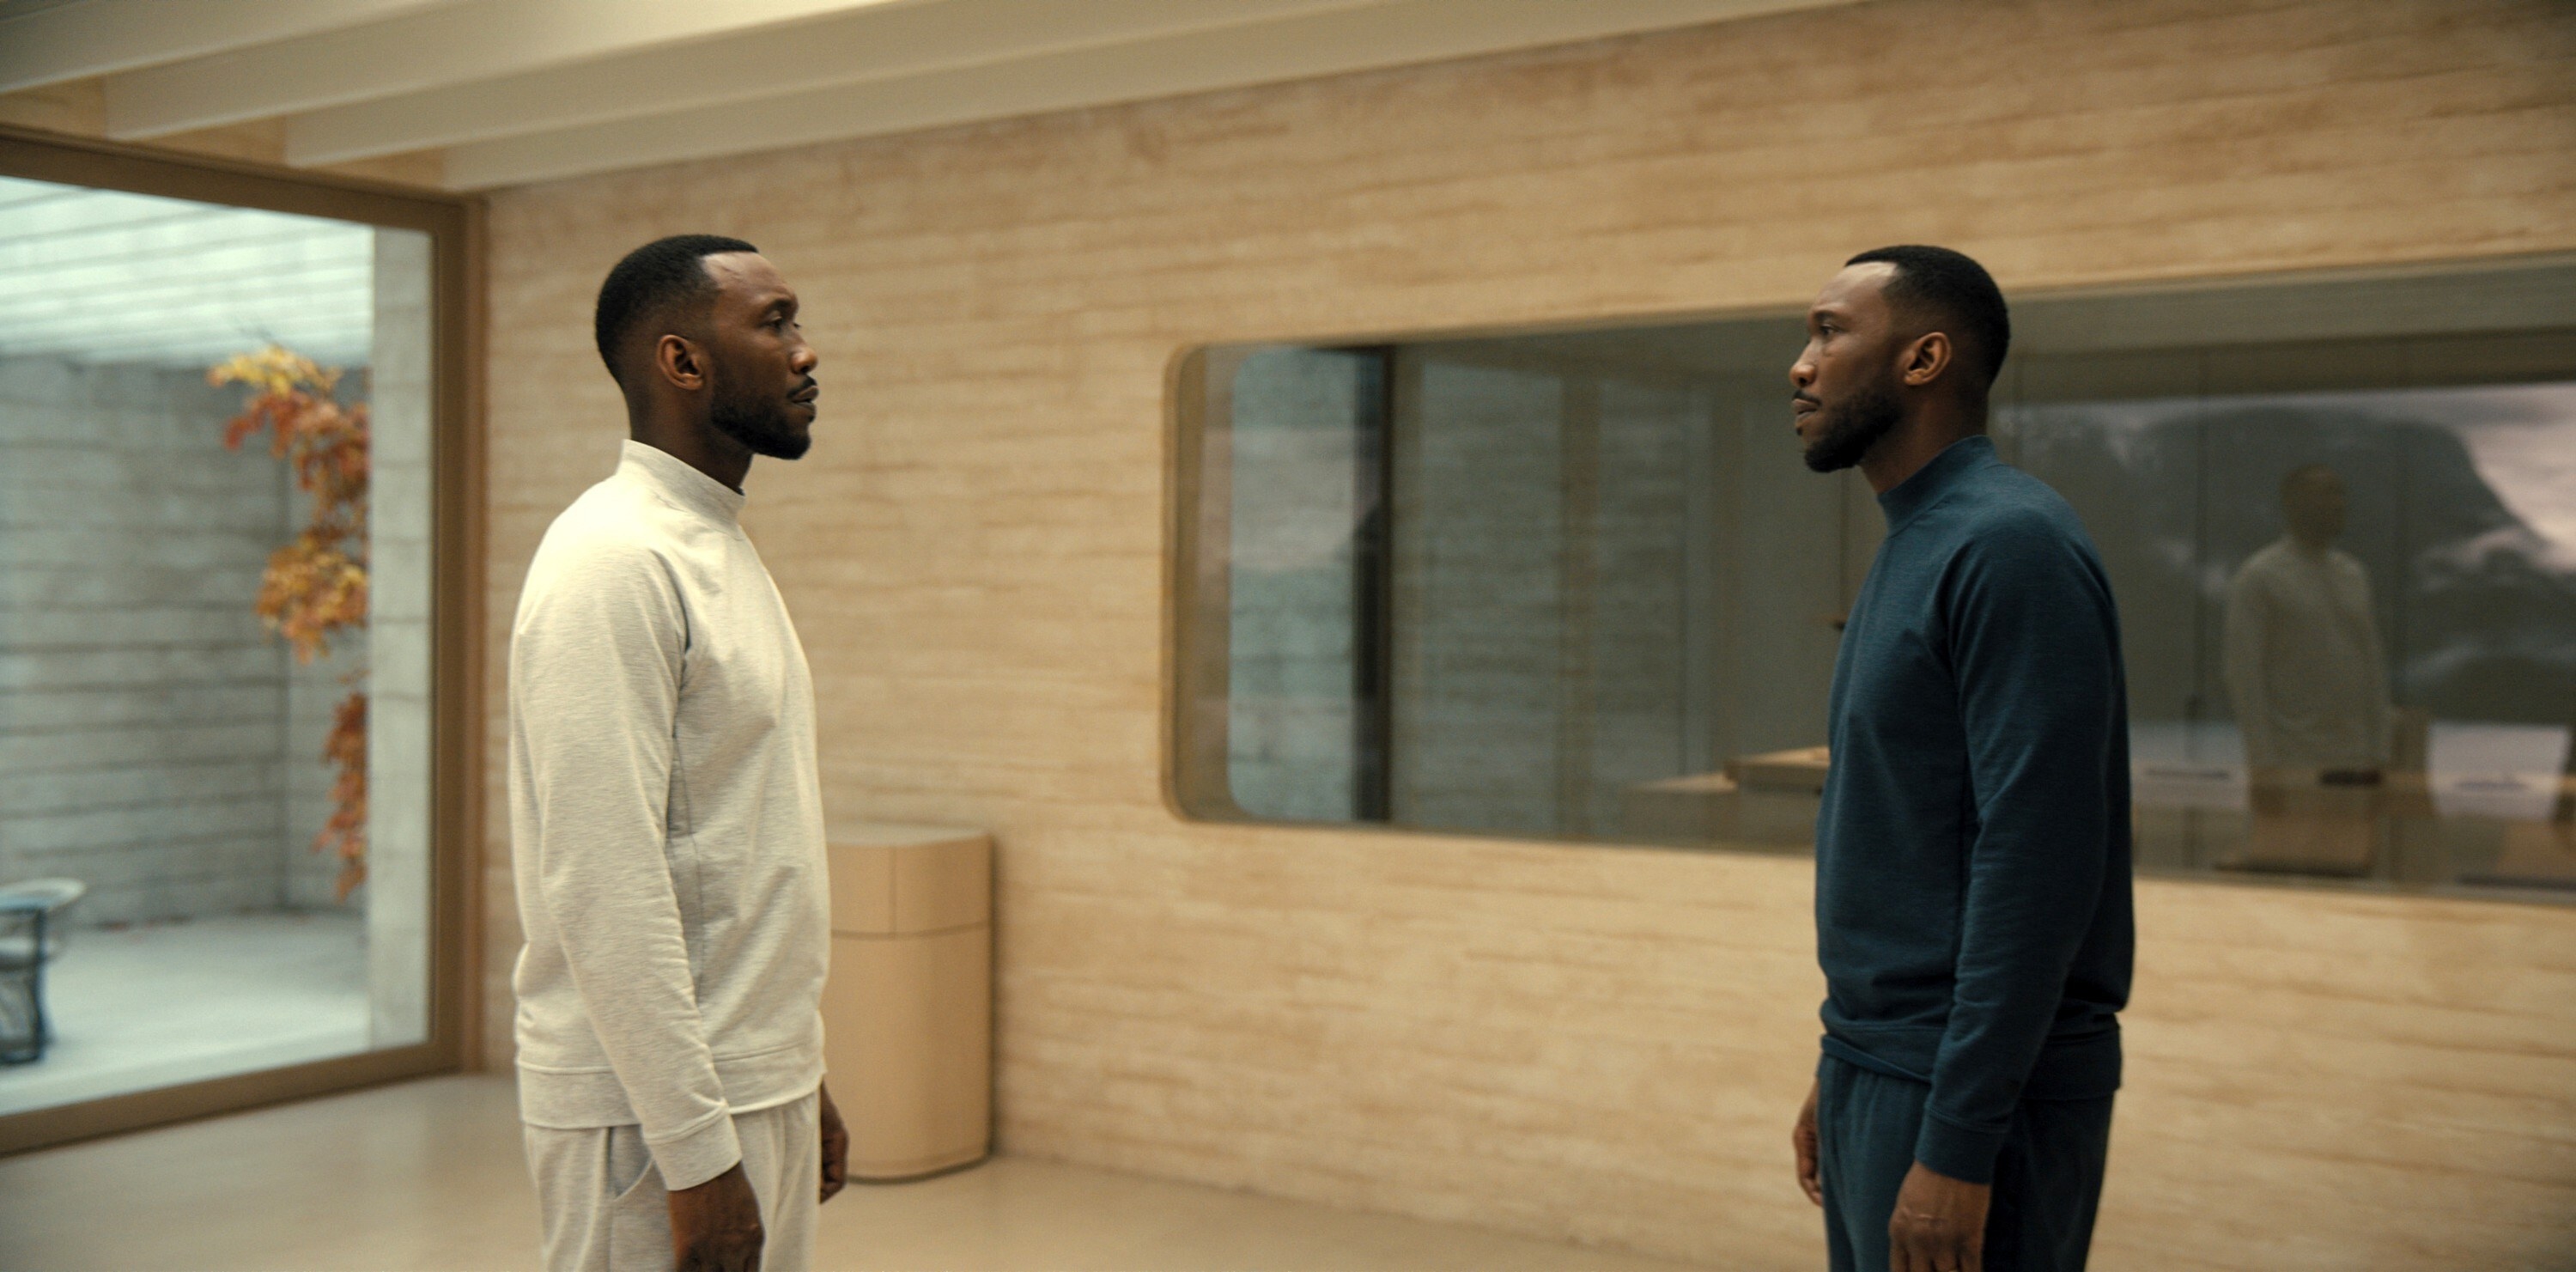 Two identical Black men stand staring at each other in a spare room. One wears white one wears navy blue